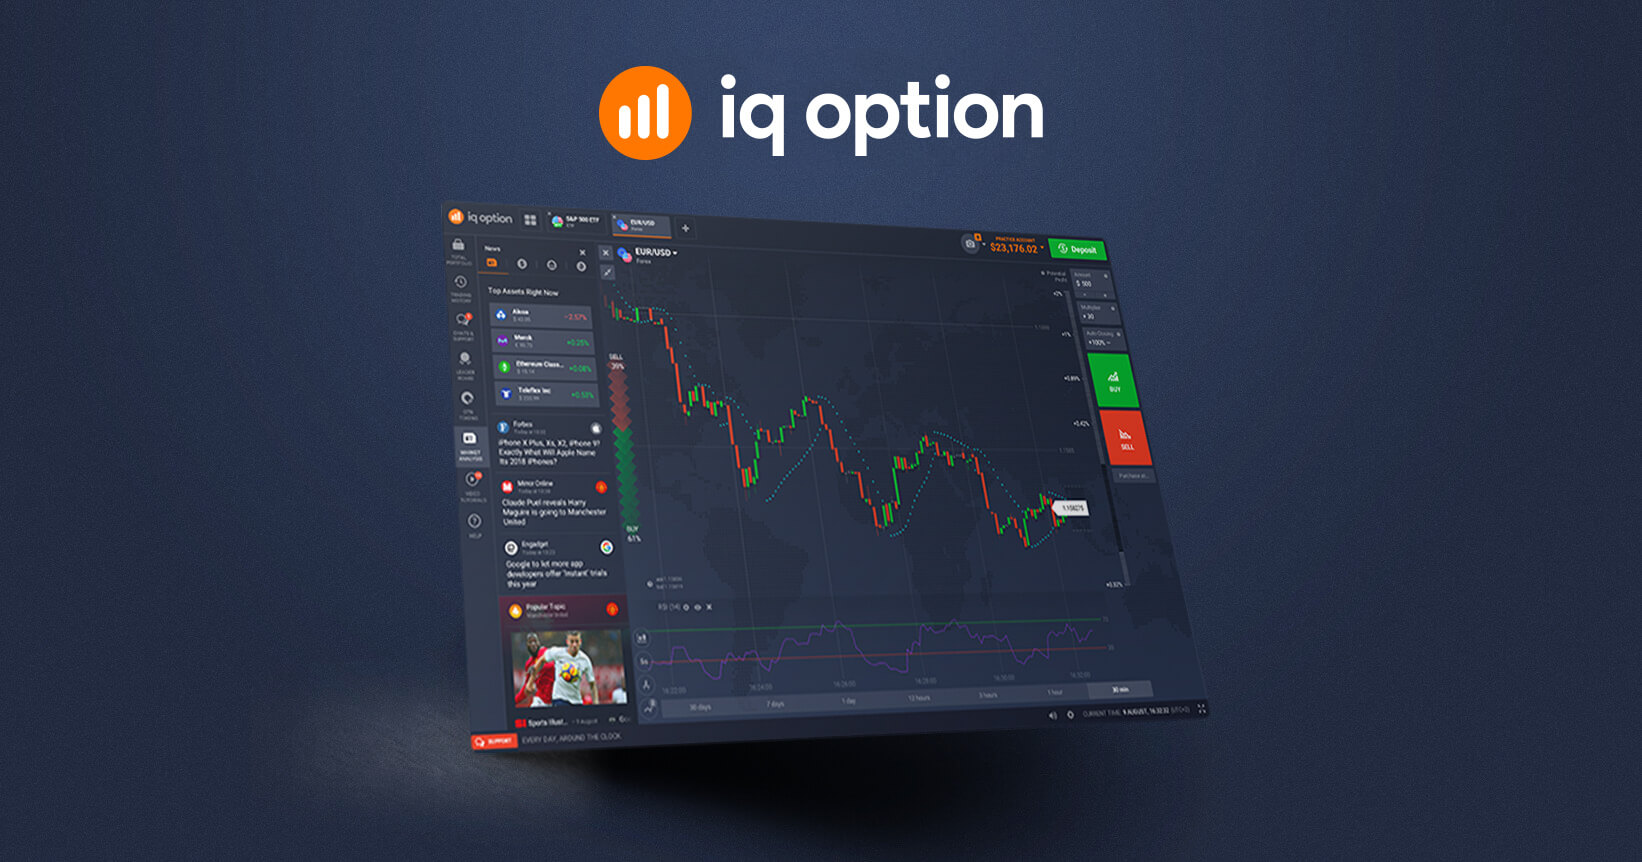 Ultimate trading with IQ Option